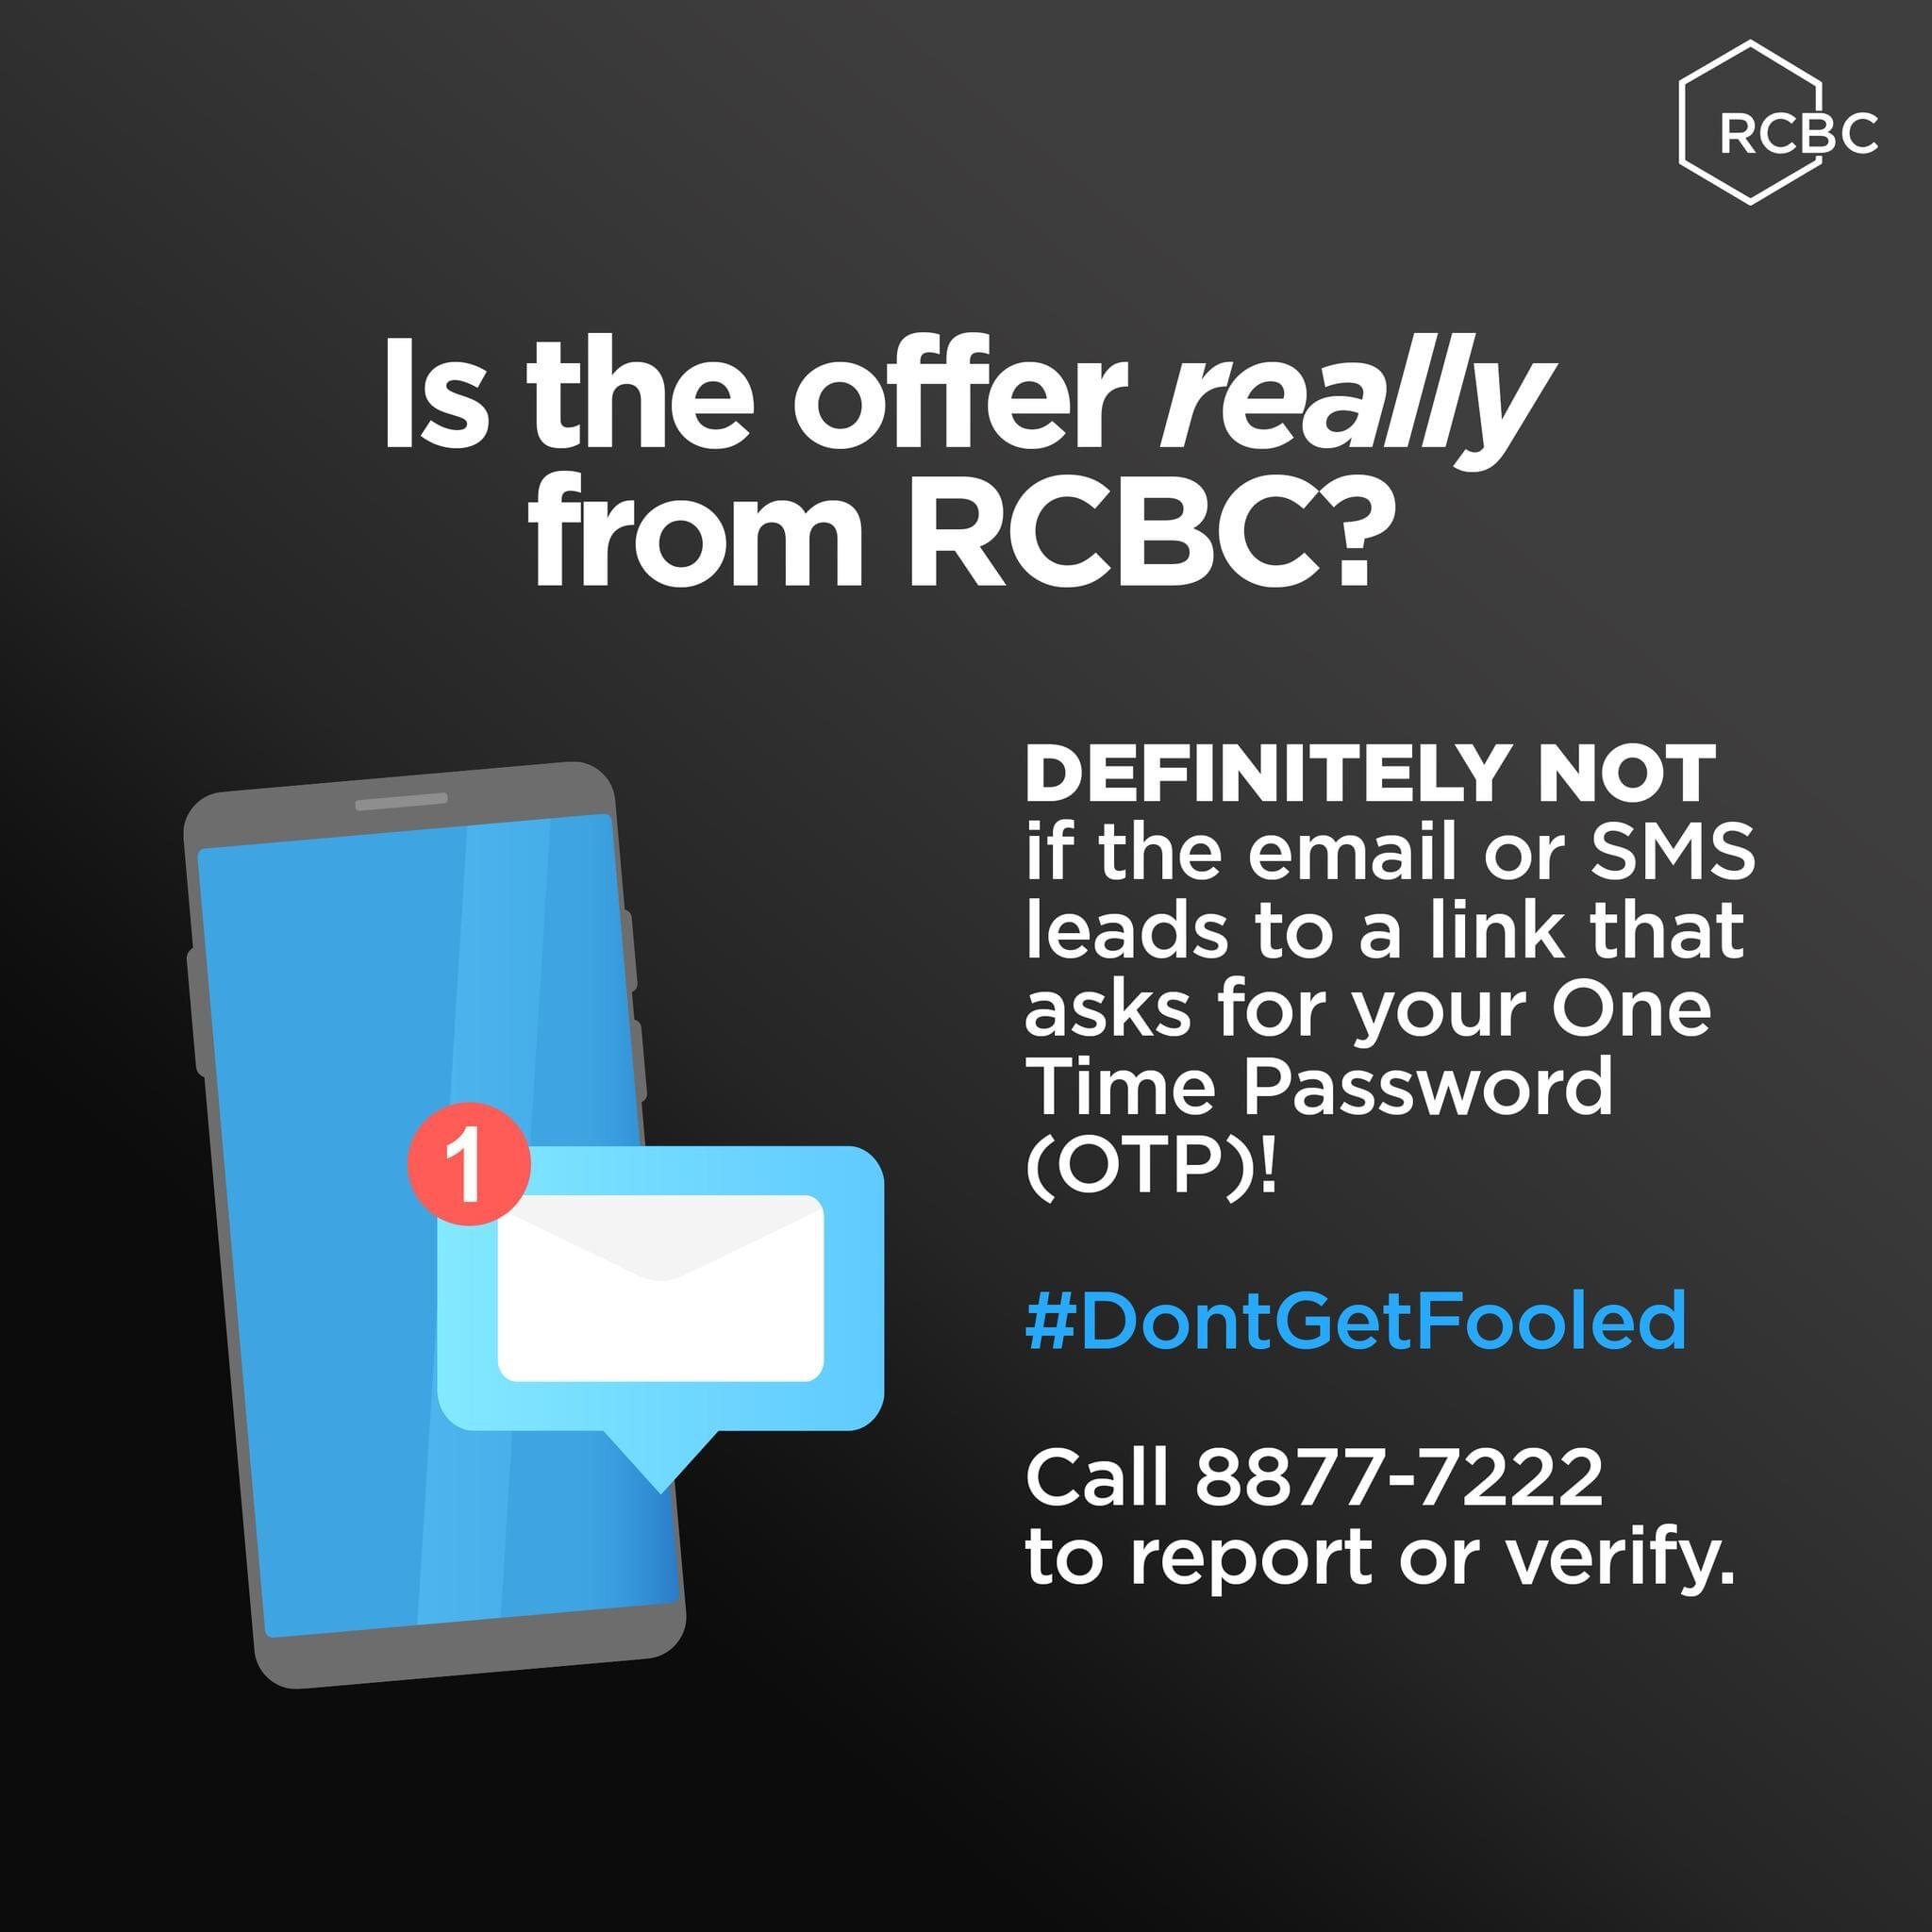 RCBC Cybersecurity Tip 1